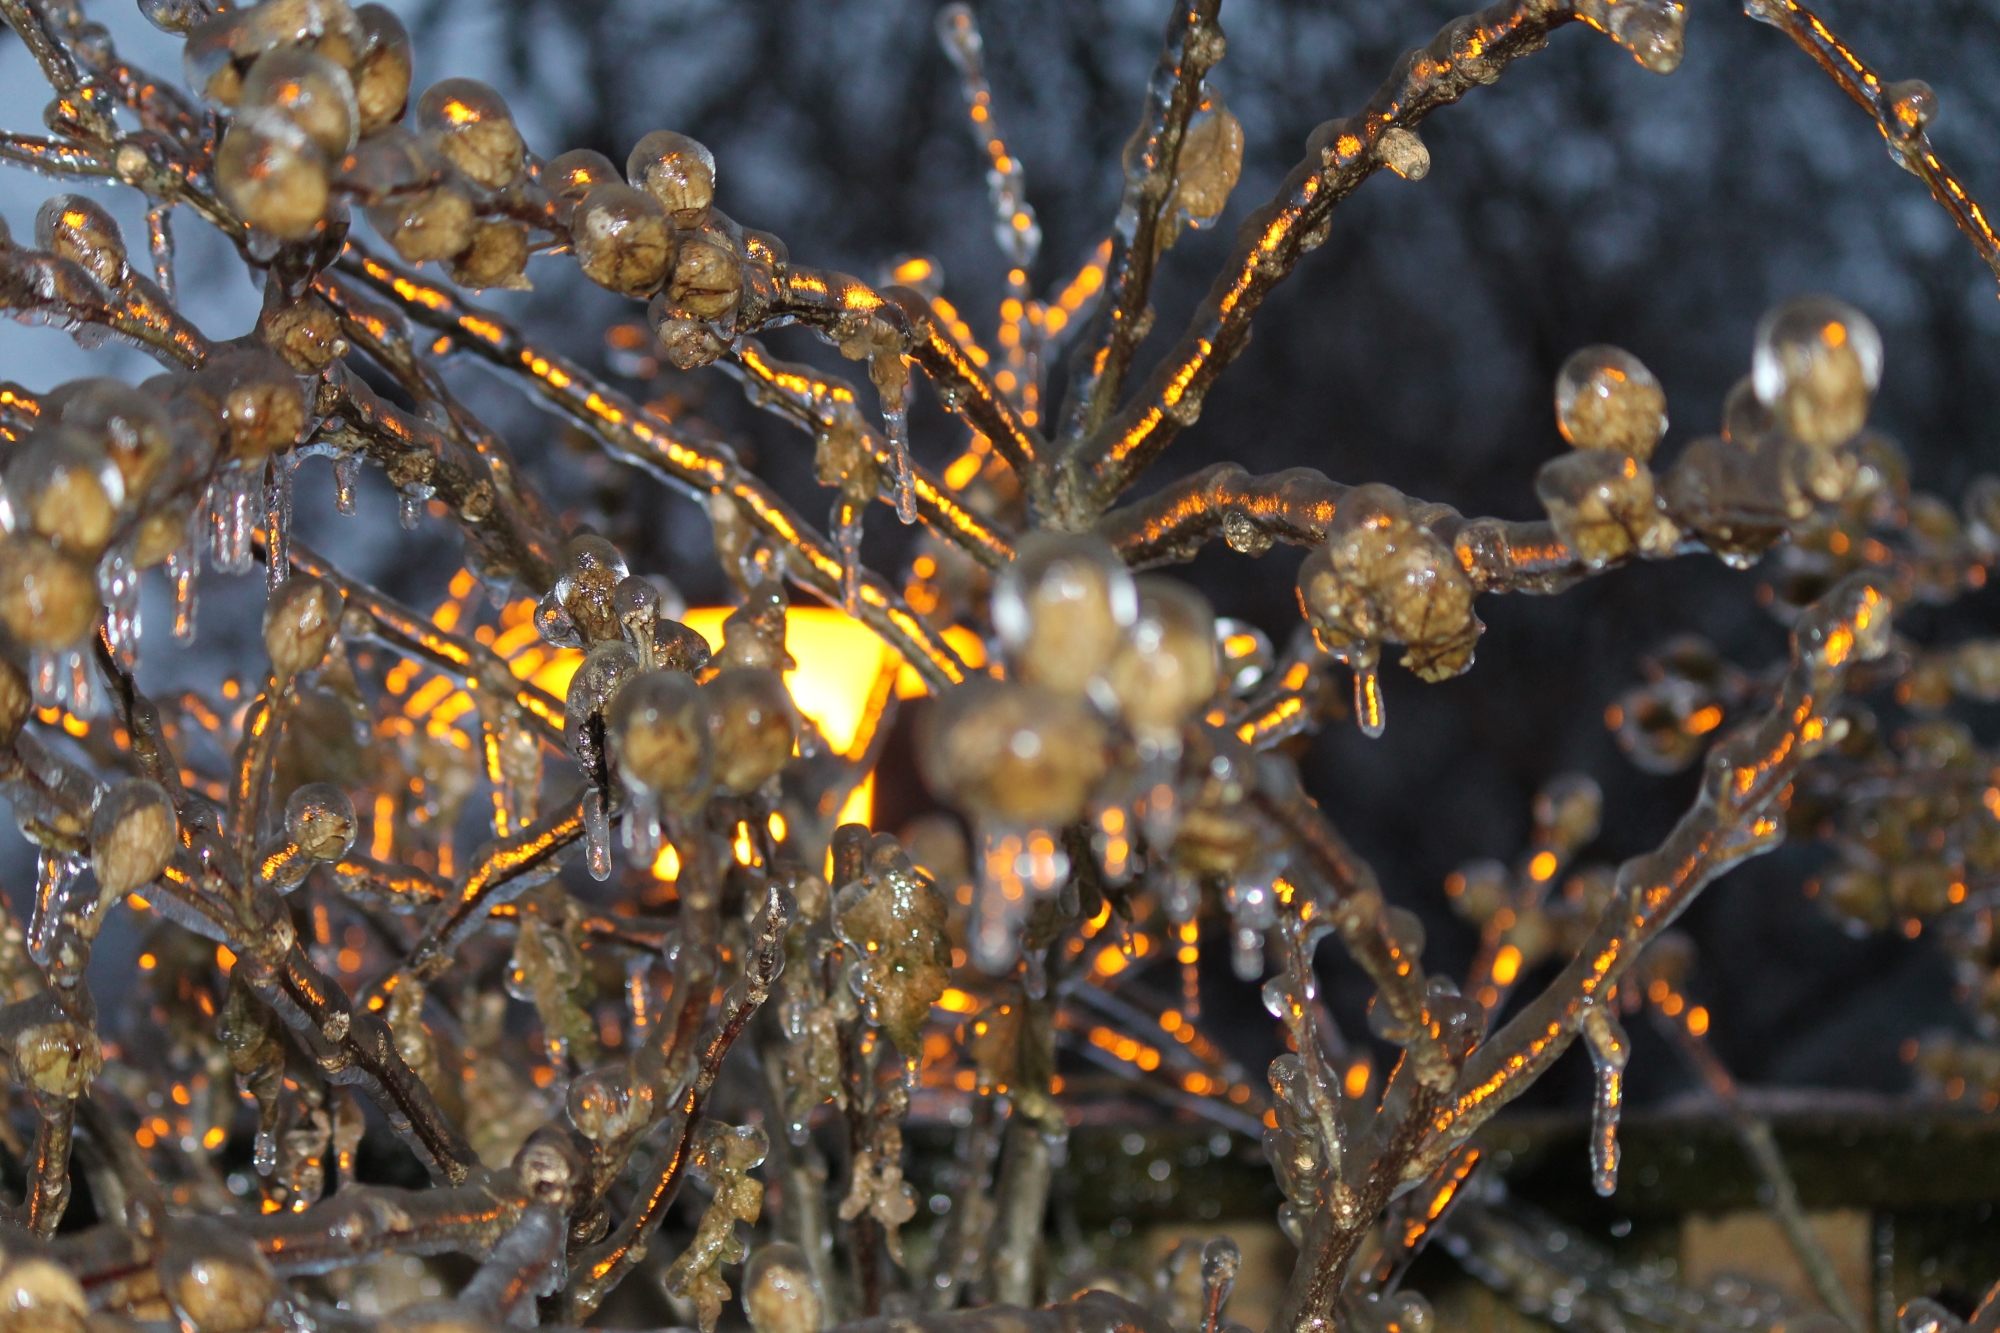 Ice on Rose of Sharon trees at night